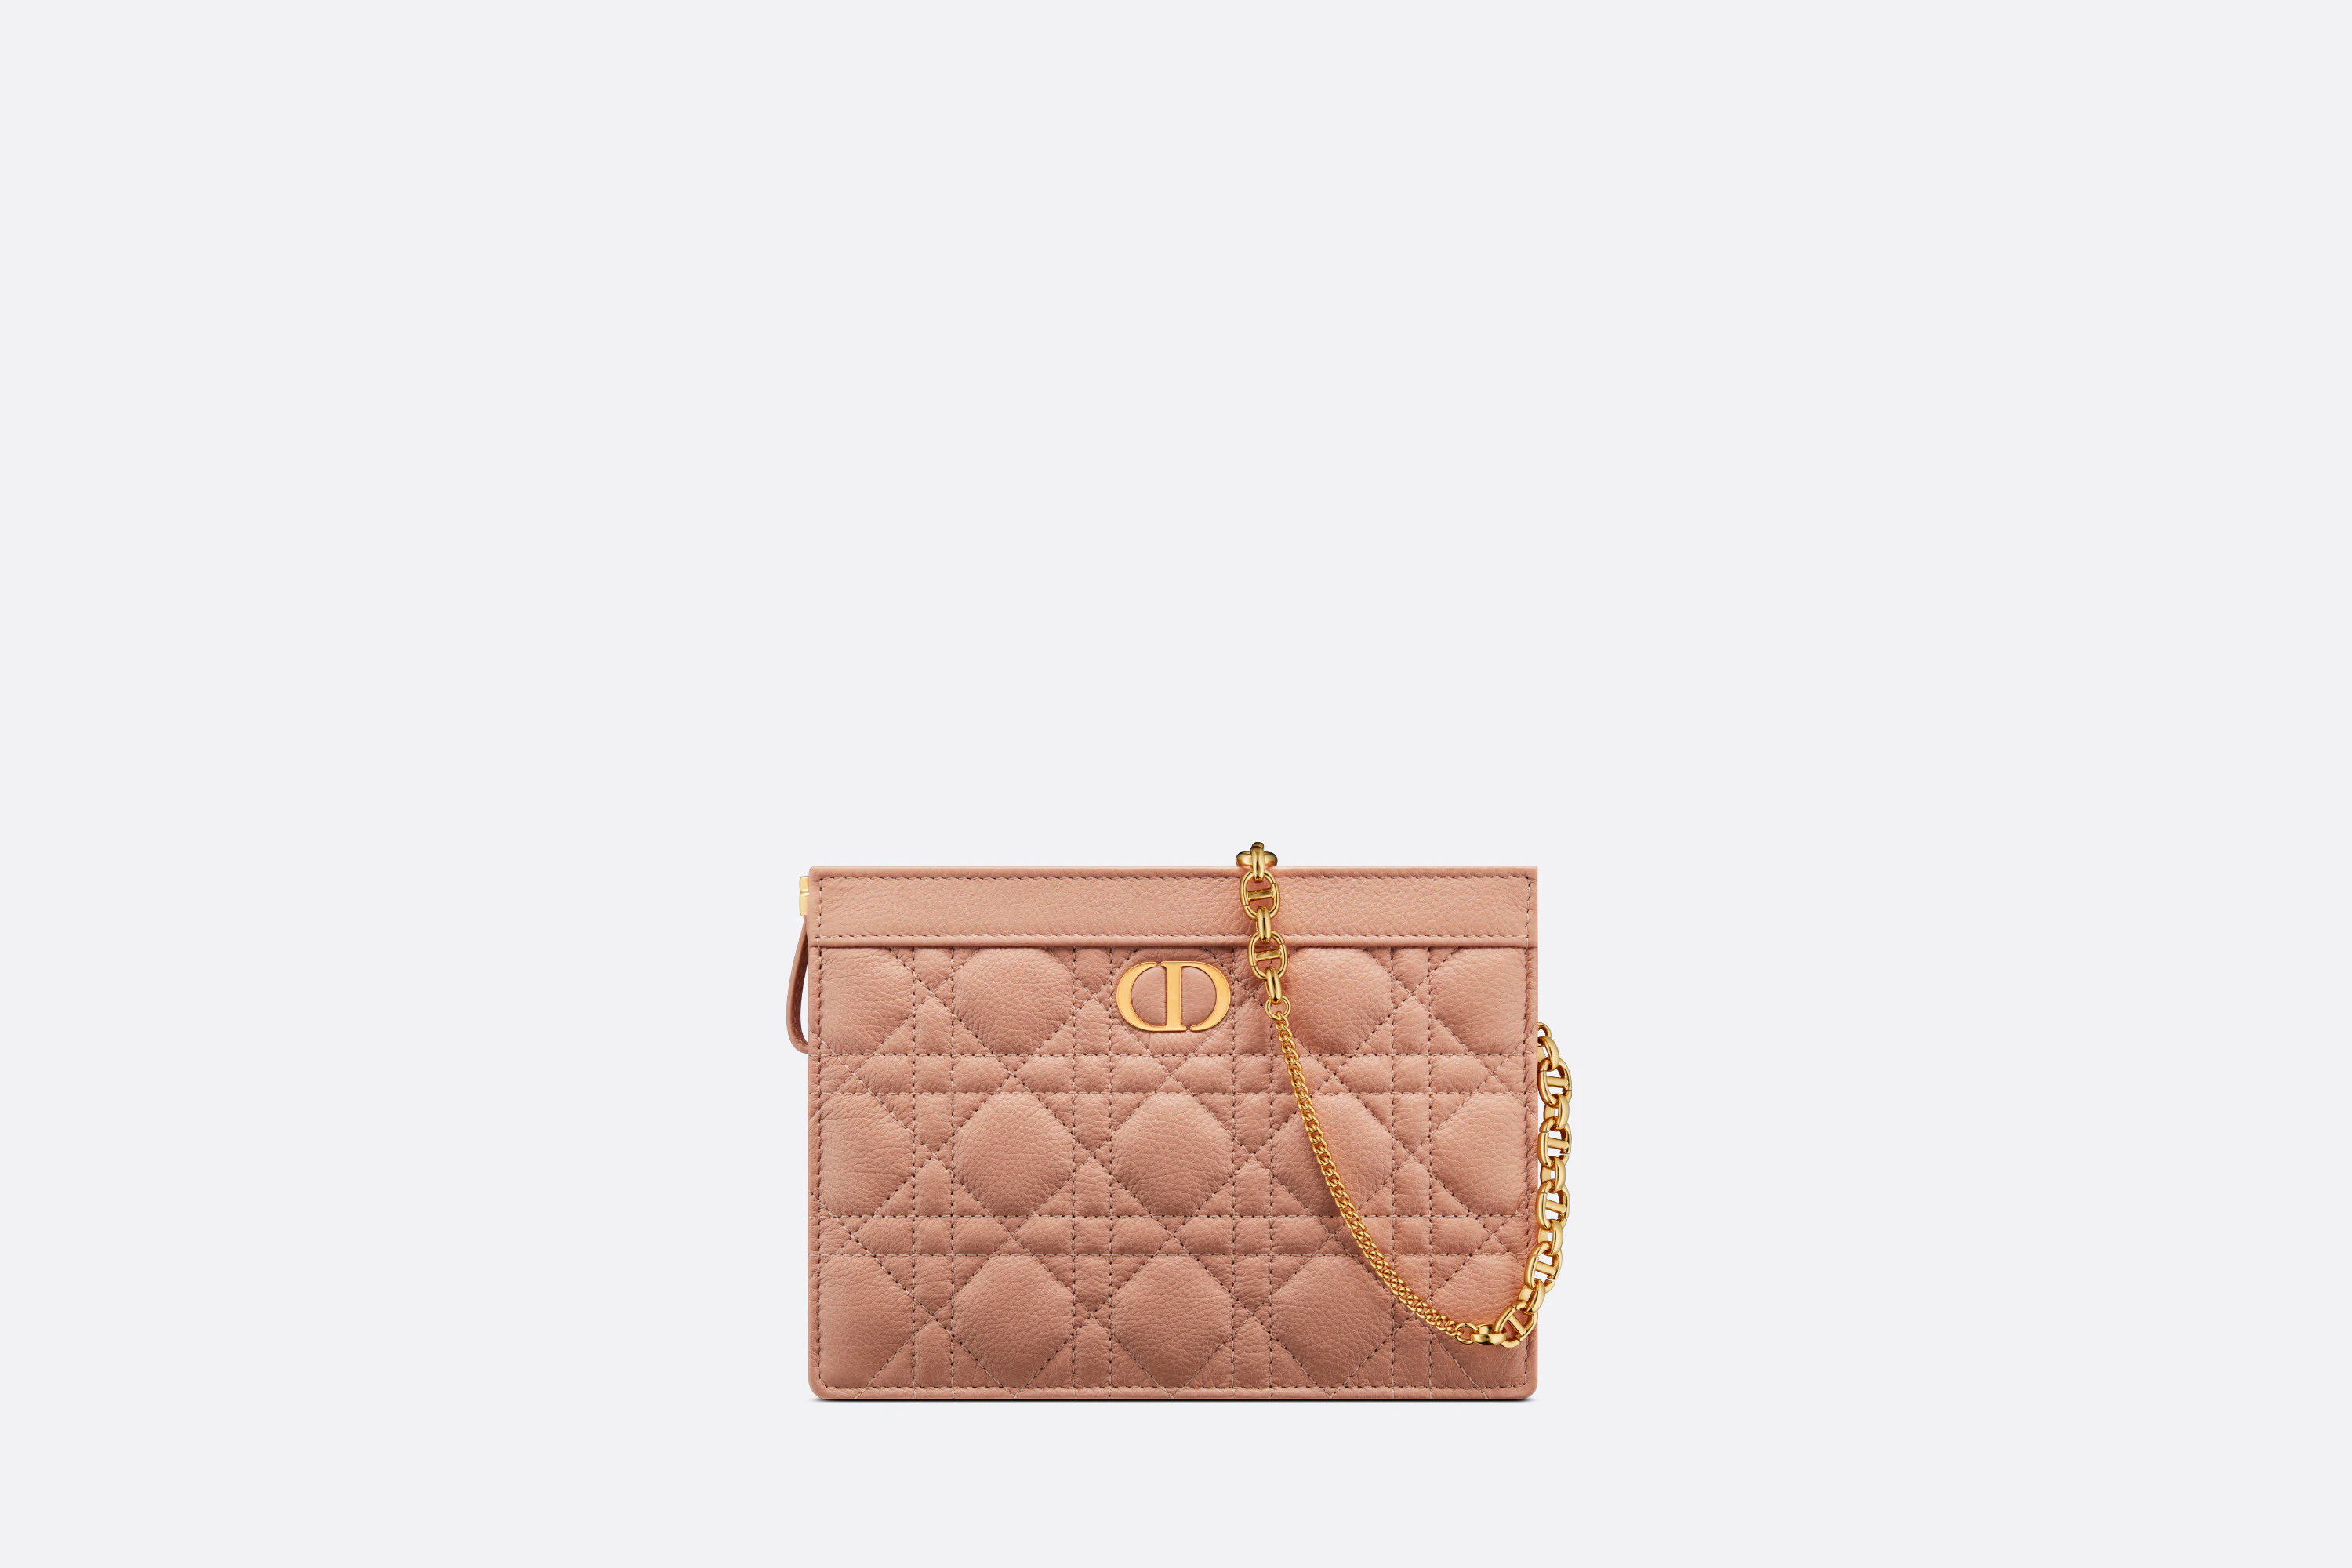 DIOR CARO ZIPPED POUCH WITH CHAIN